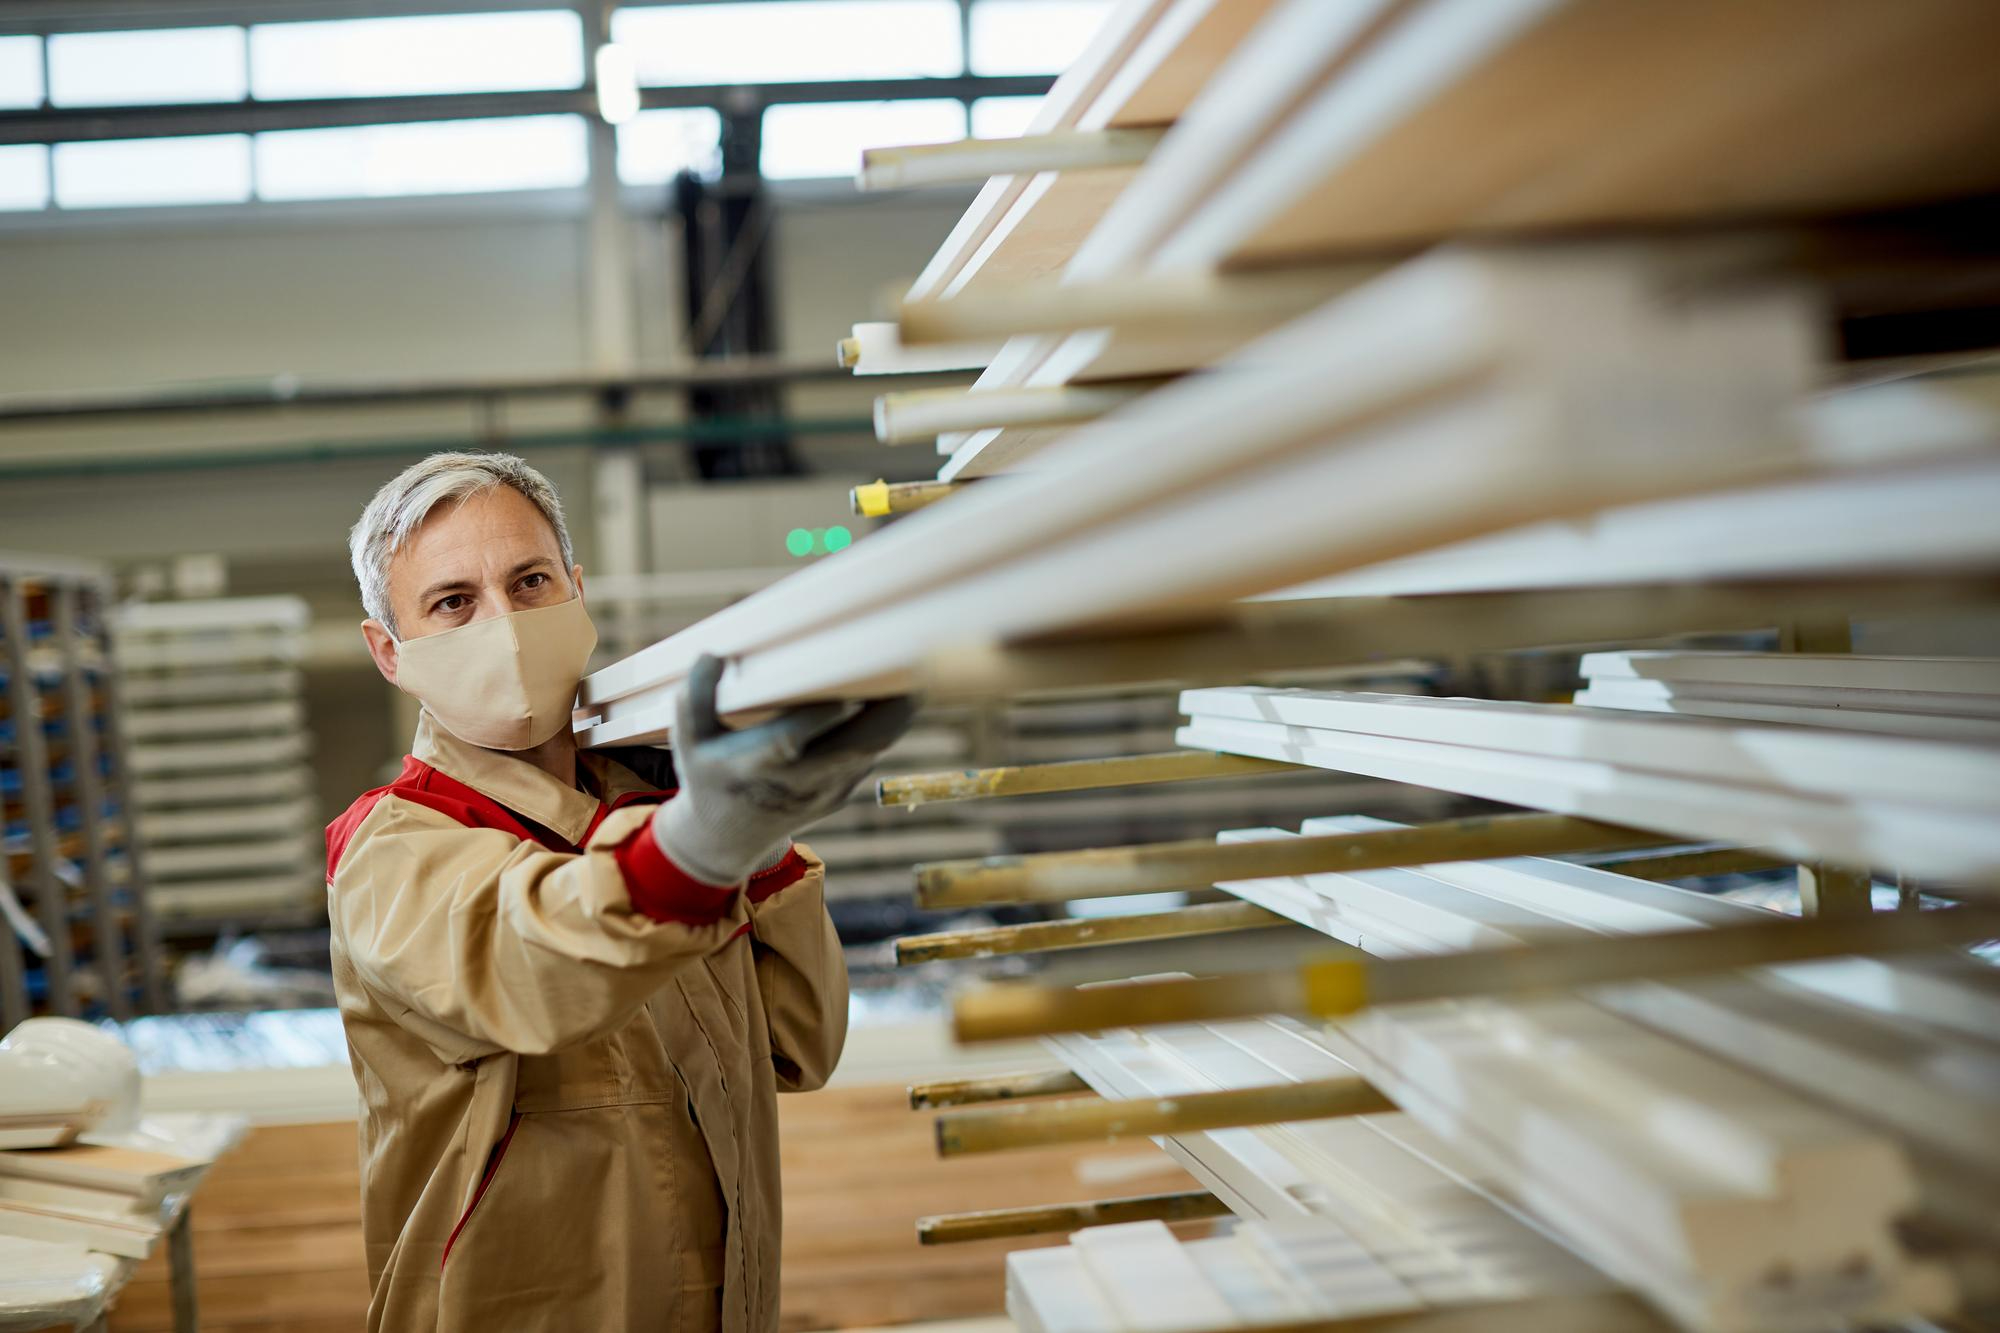 A worker placing finished cladding boards on a timber rack